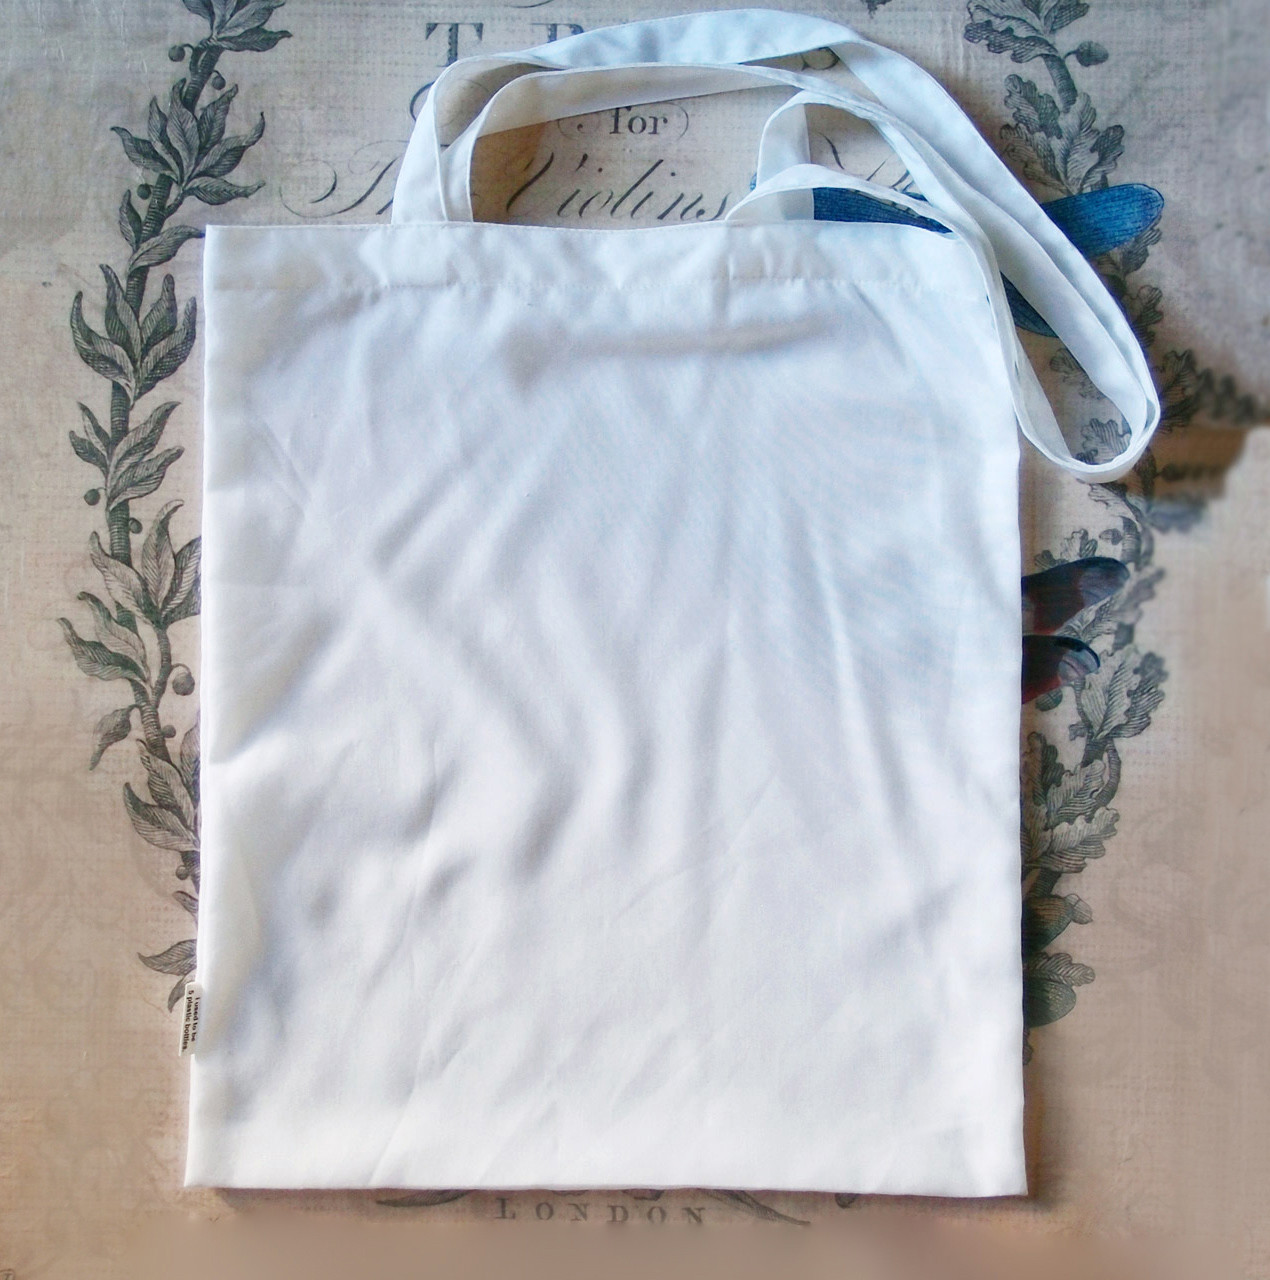 Recycled Bottle Tote Bag 14 x 16 ¼ inches White B699-51, Wholesale Recycled (RPET) Tote Bags